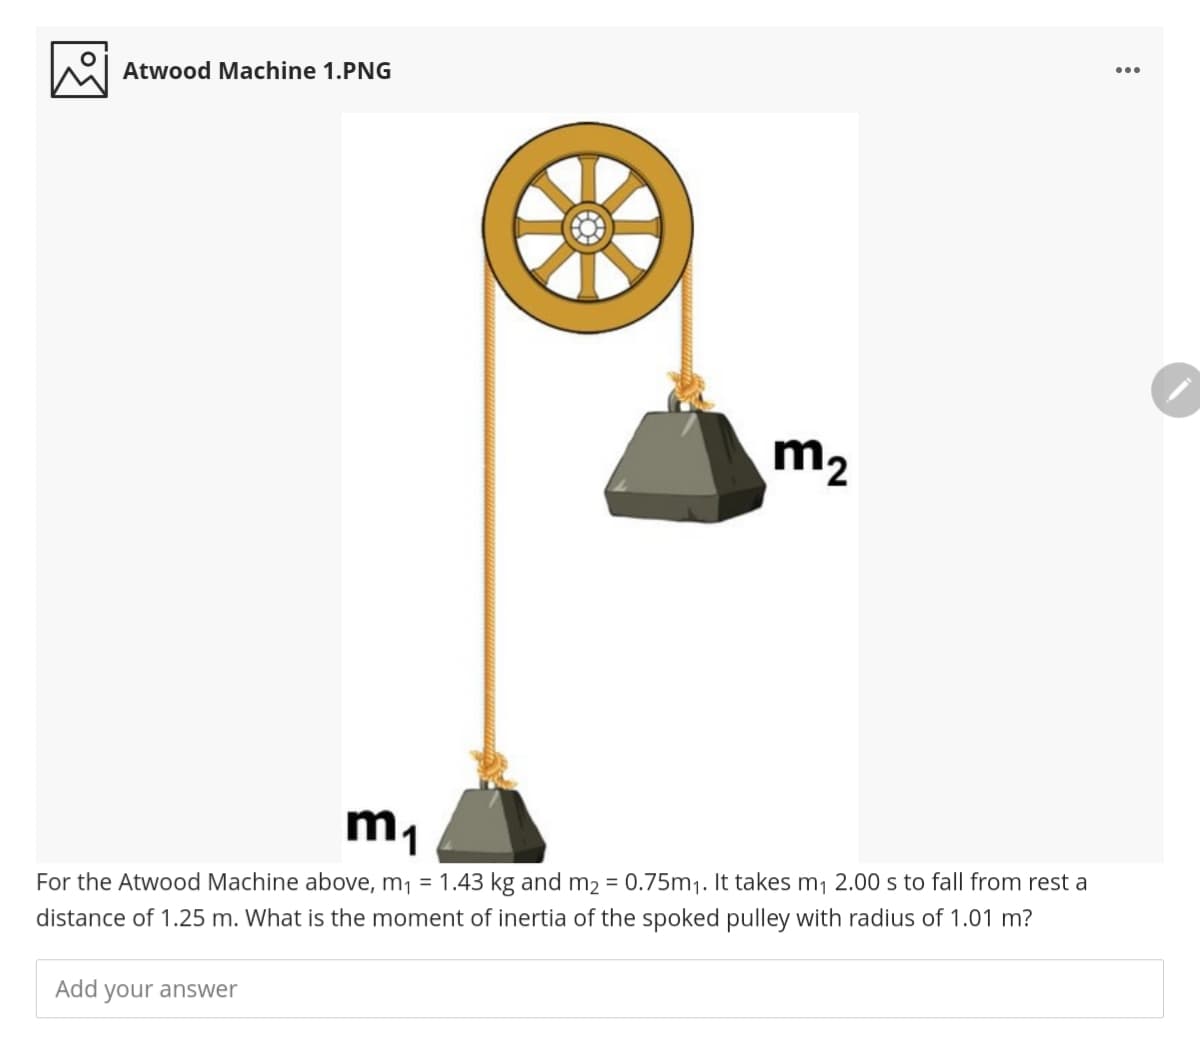 Atwood Machine 1.PNG
m2
m1
For the Atwood Machine above, m, = 1.43 kg and m2 = 0.75m1. It takes m1 2.00 s to fall from rest a
distance of 1.25 m. What is the moment of inertia of the spoked pulley with radius of 1.01 m?
Add your answer
